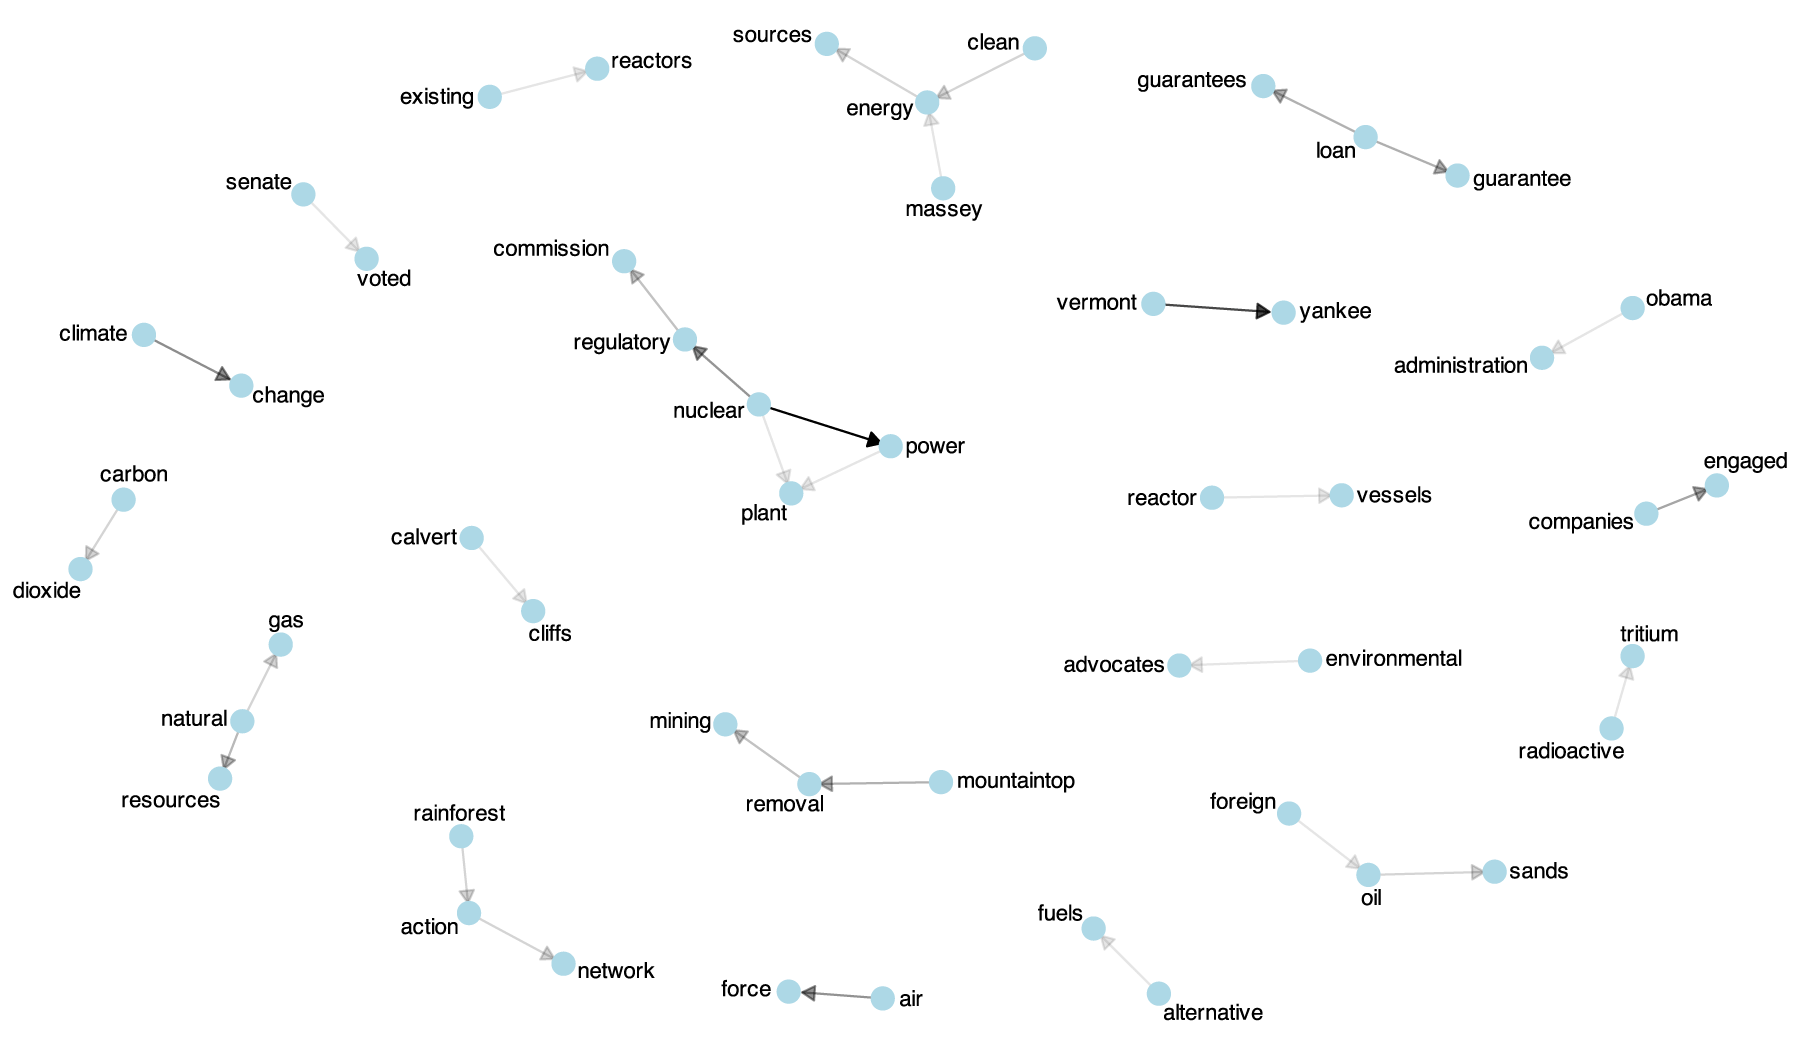 Network map of topics discussed in the news media in 2010